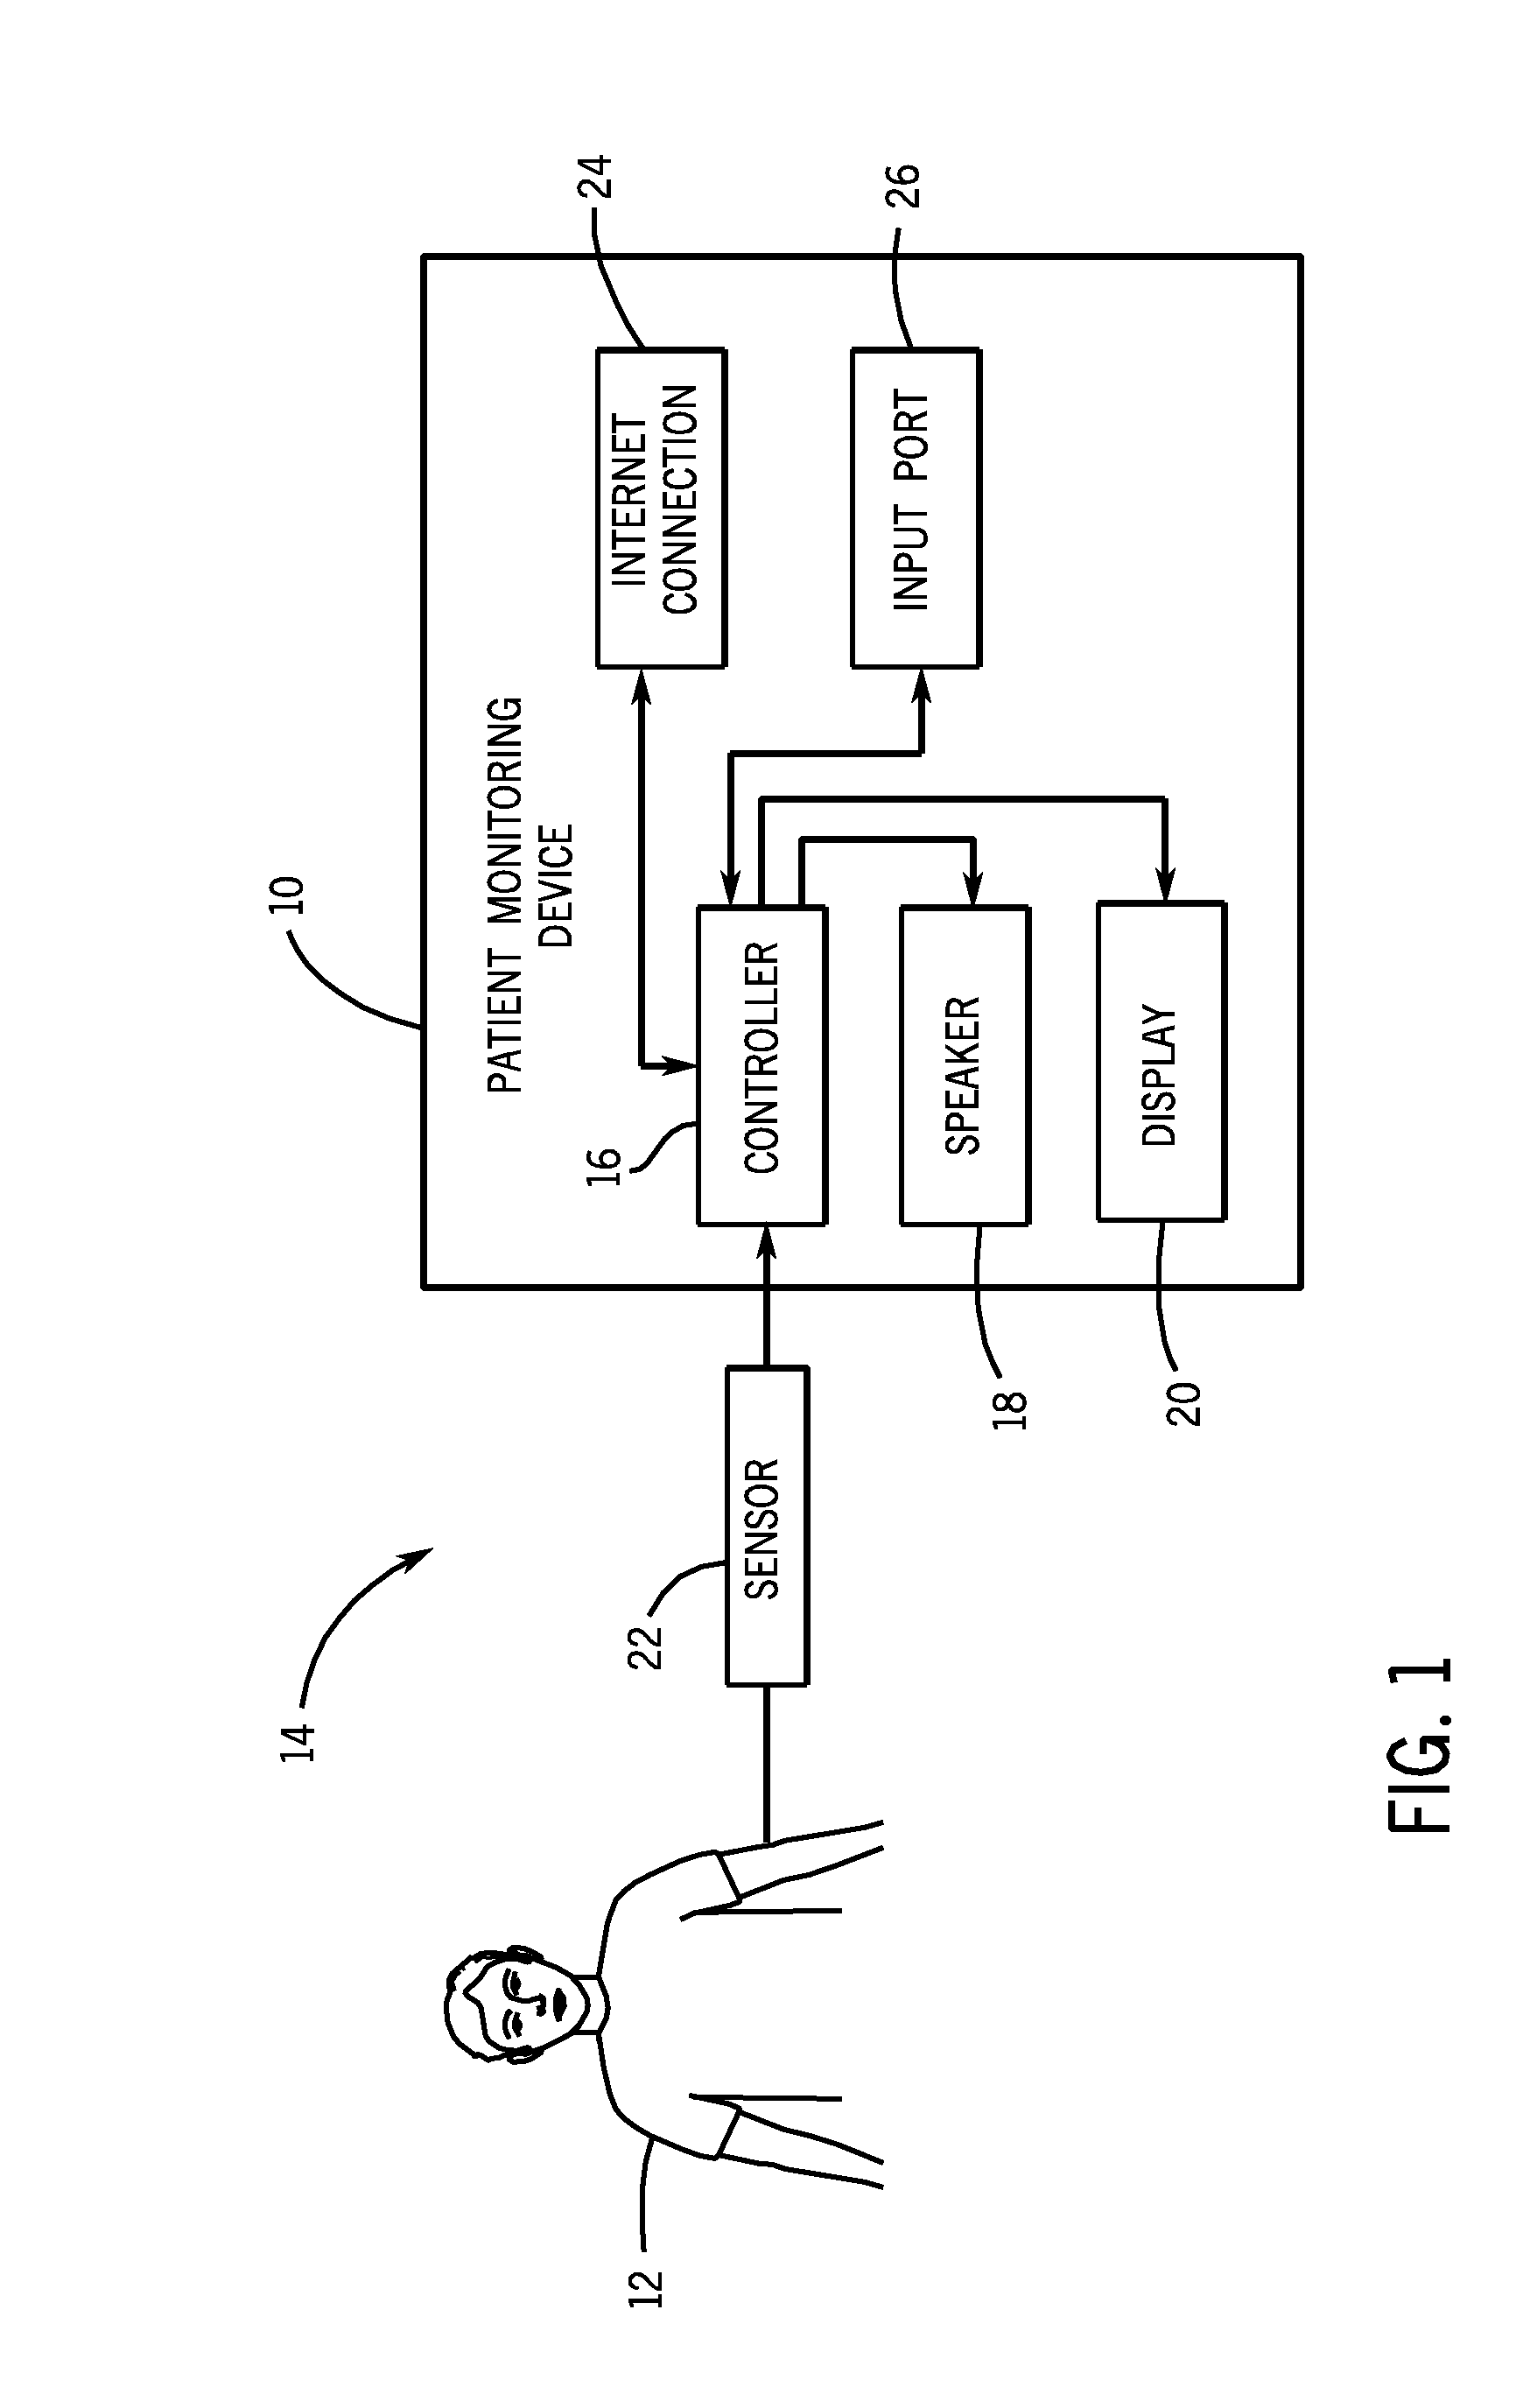 Apparatus and method for a patient monitor